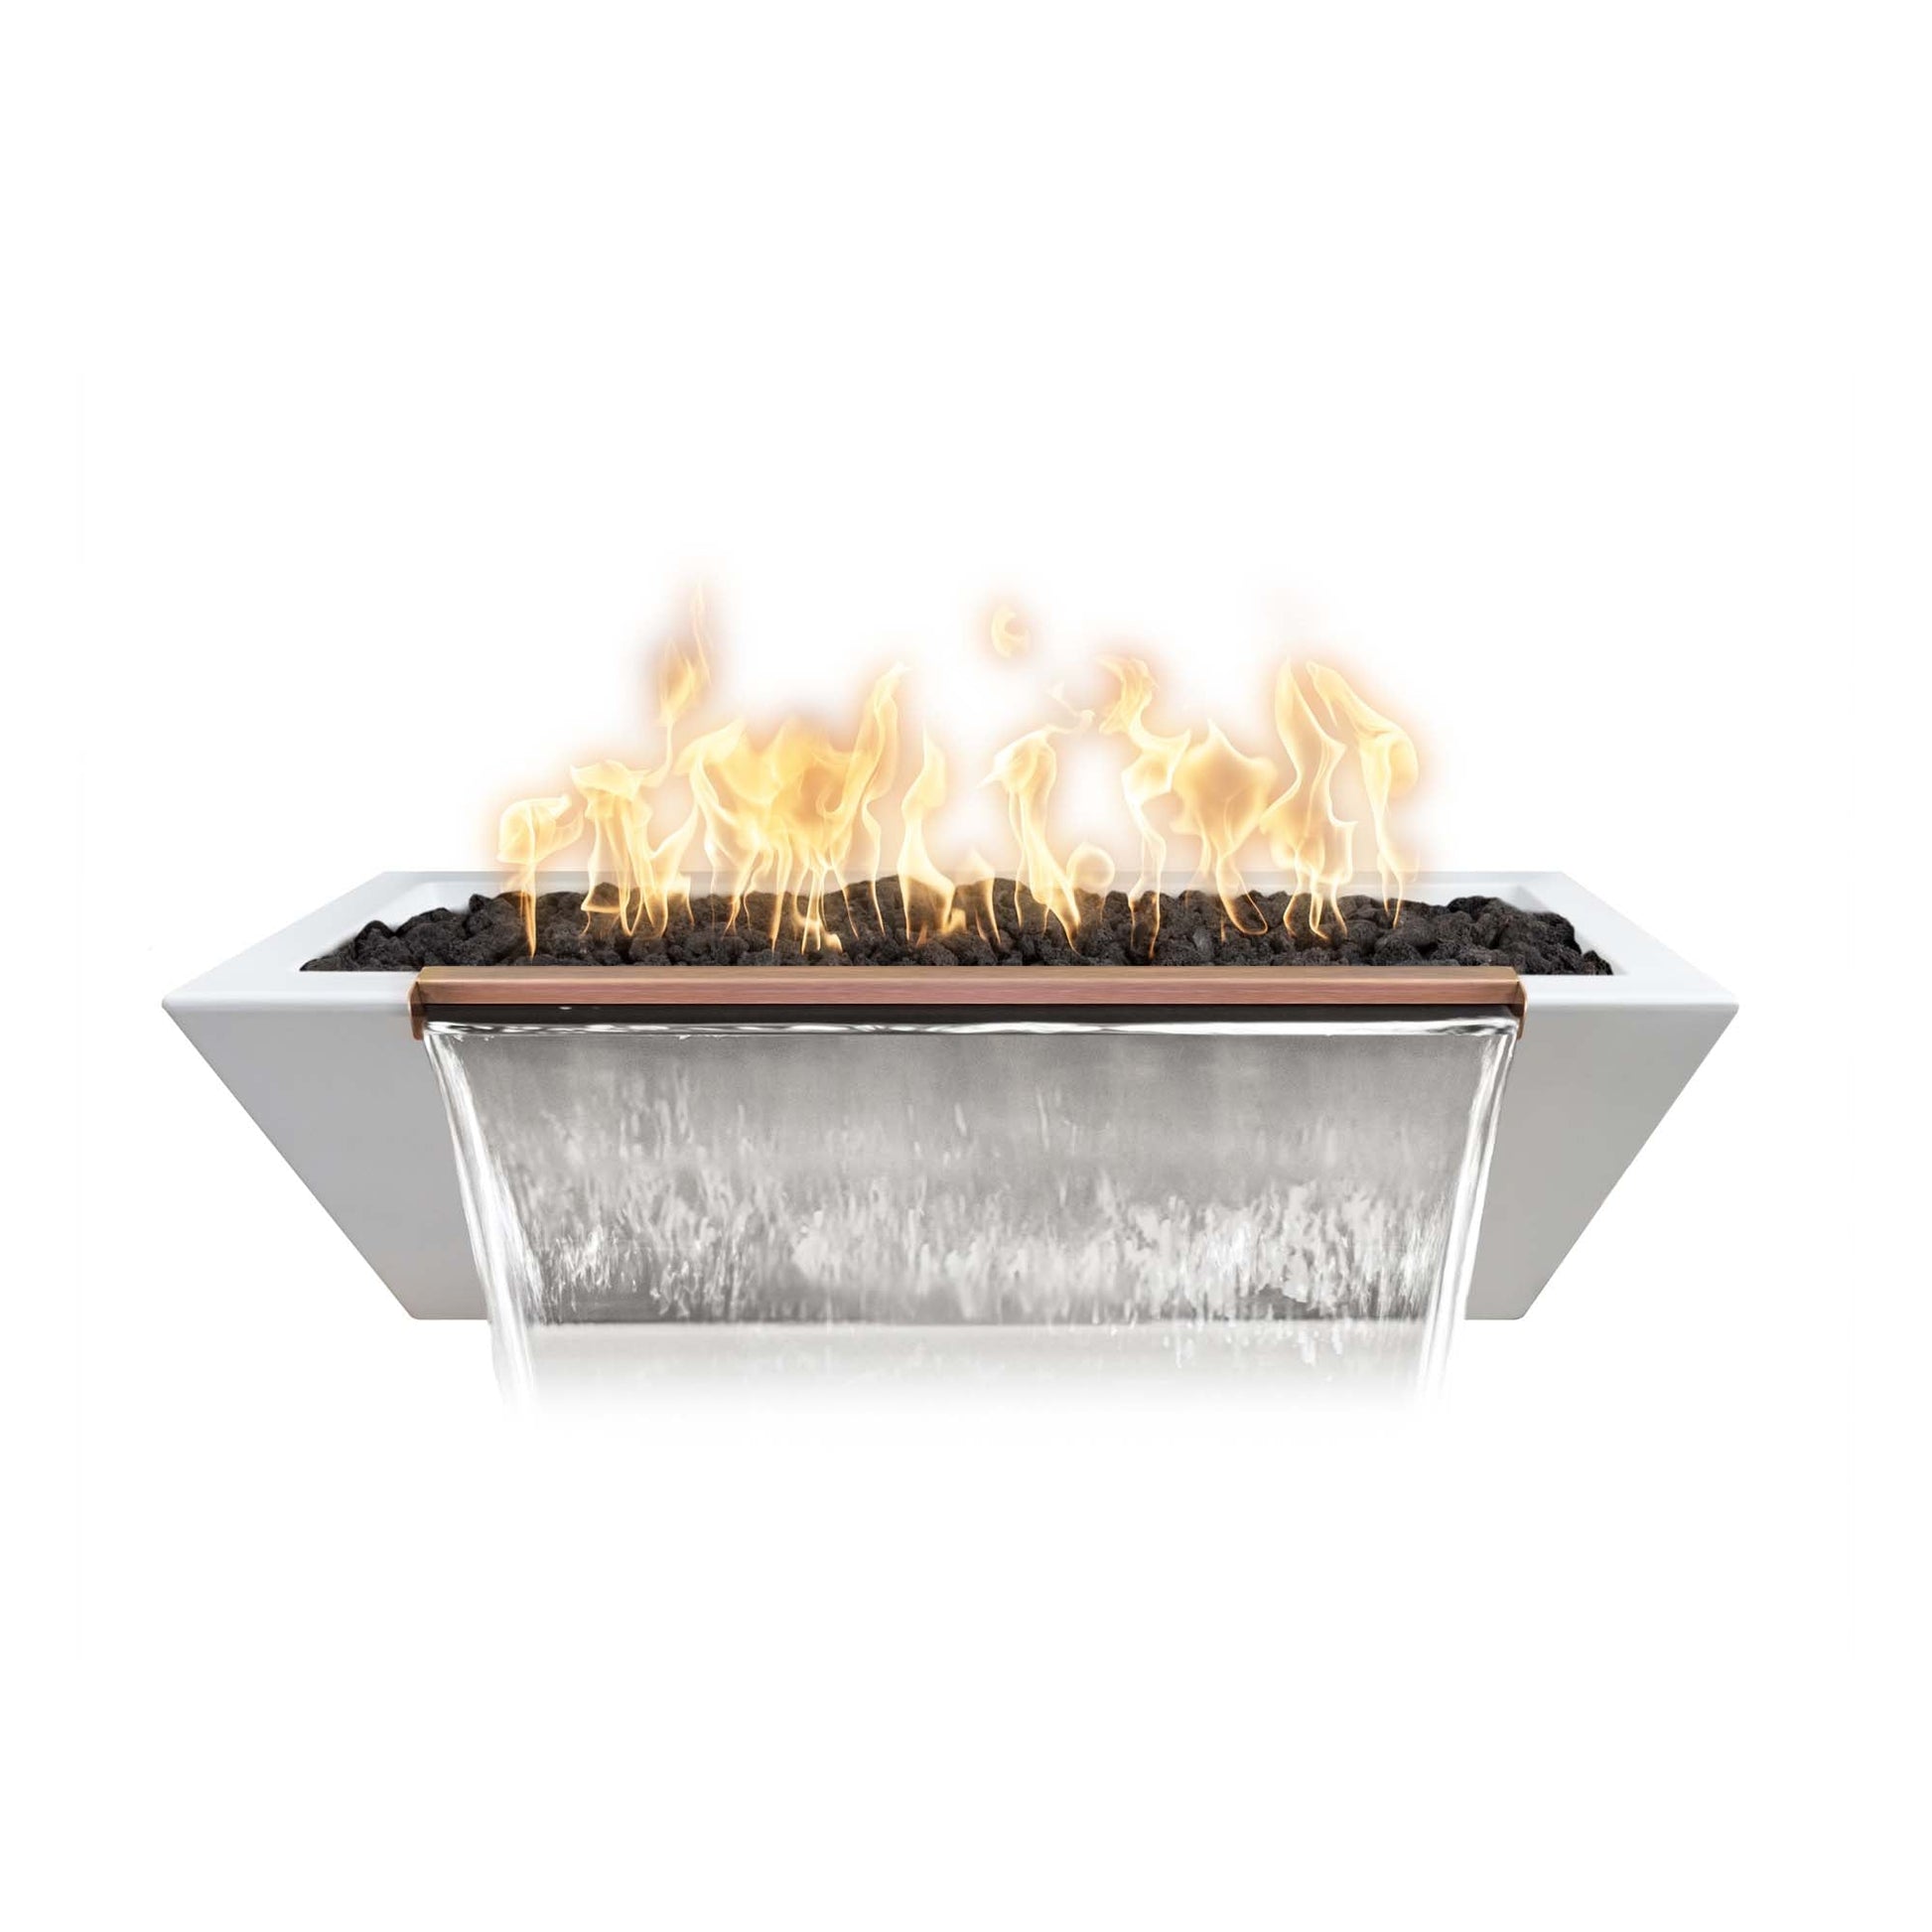 The Outdoor Plus Linear Maya 72" Metallic Copper GFRC Concrete Natural Gas Fire & Water Bowl with Match Lit with Flame Sense Ignition